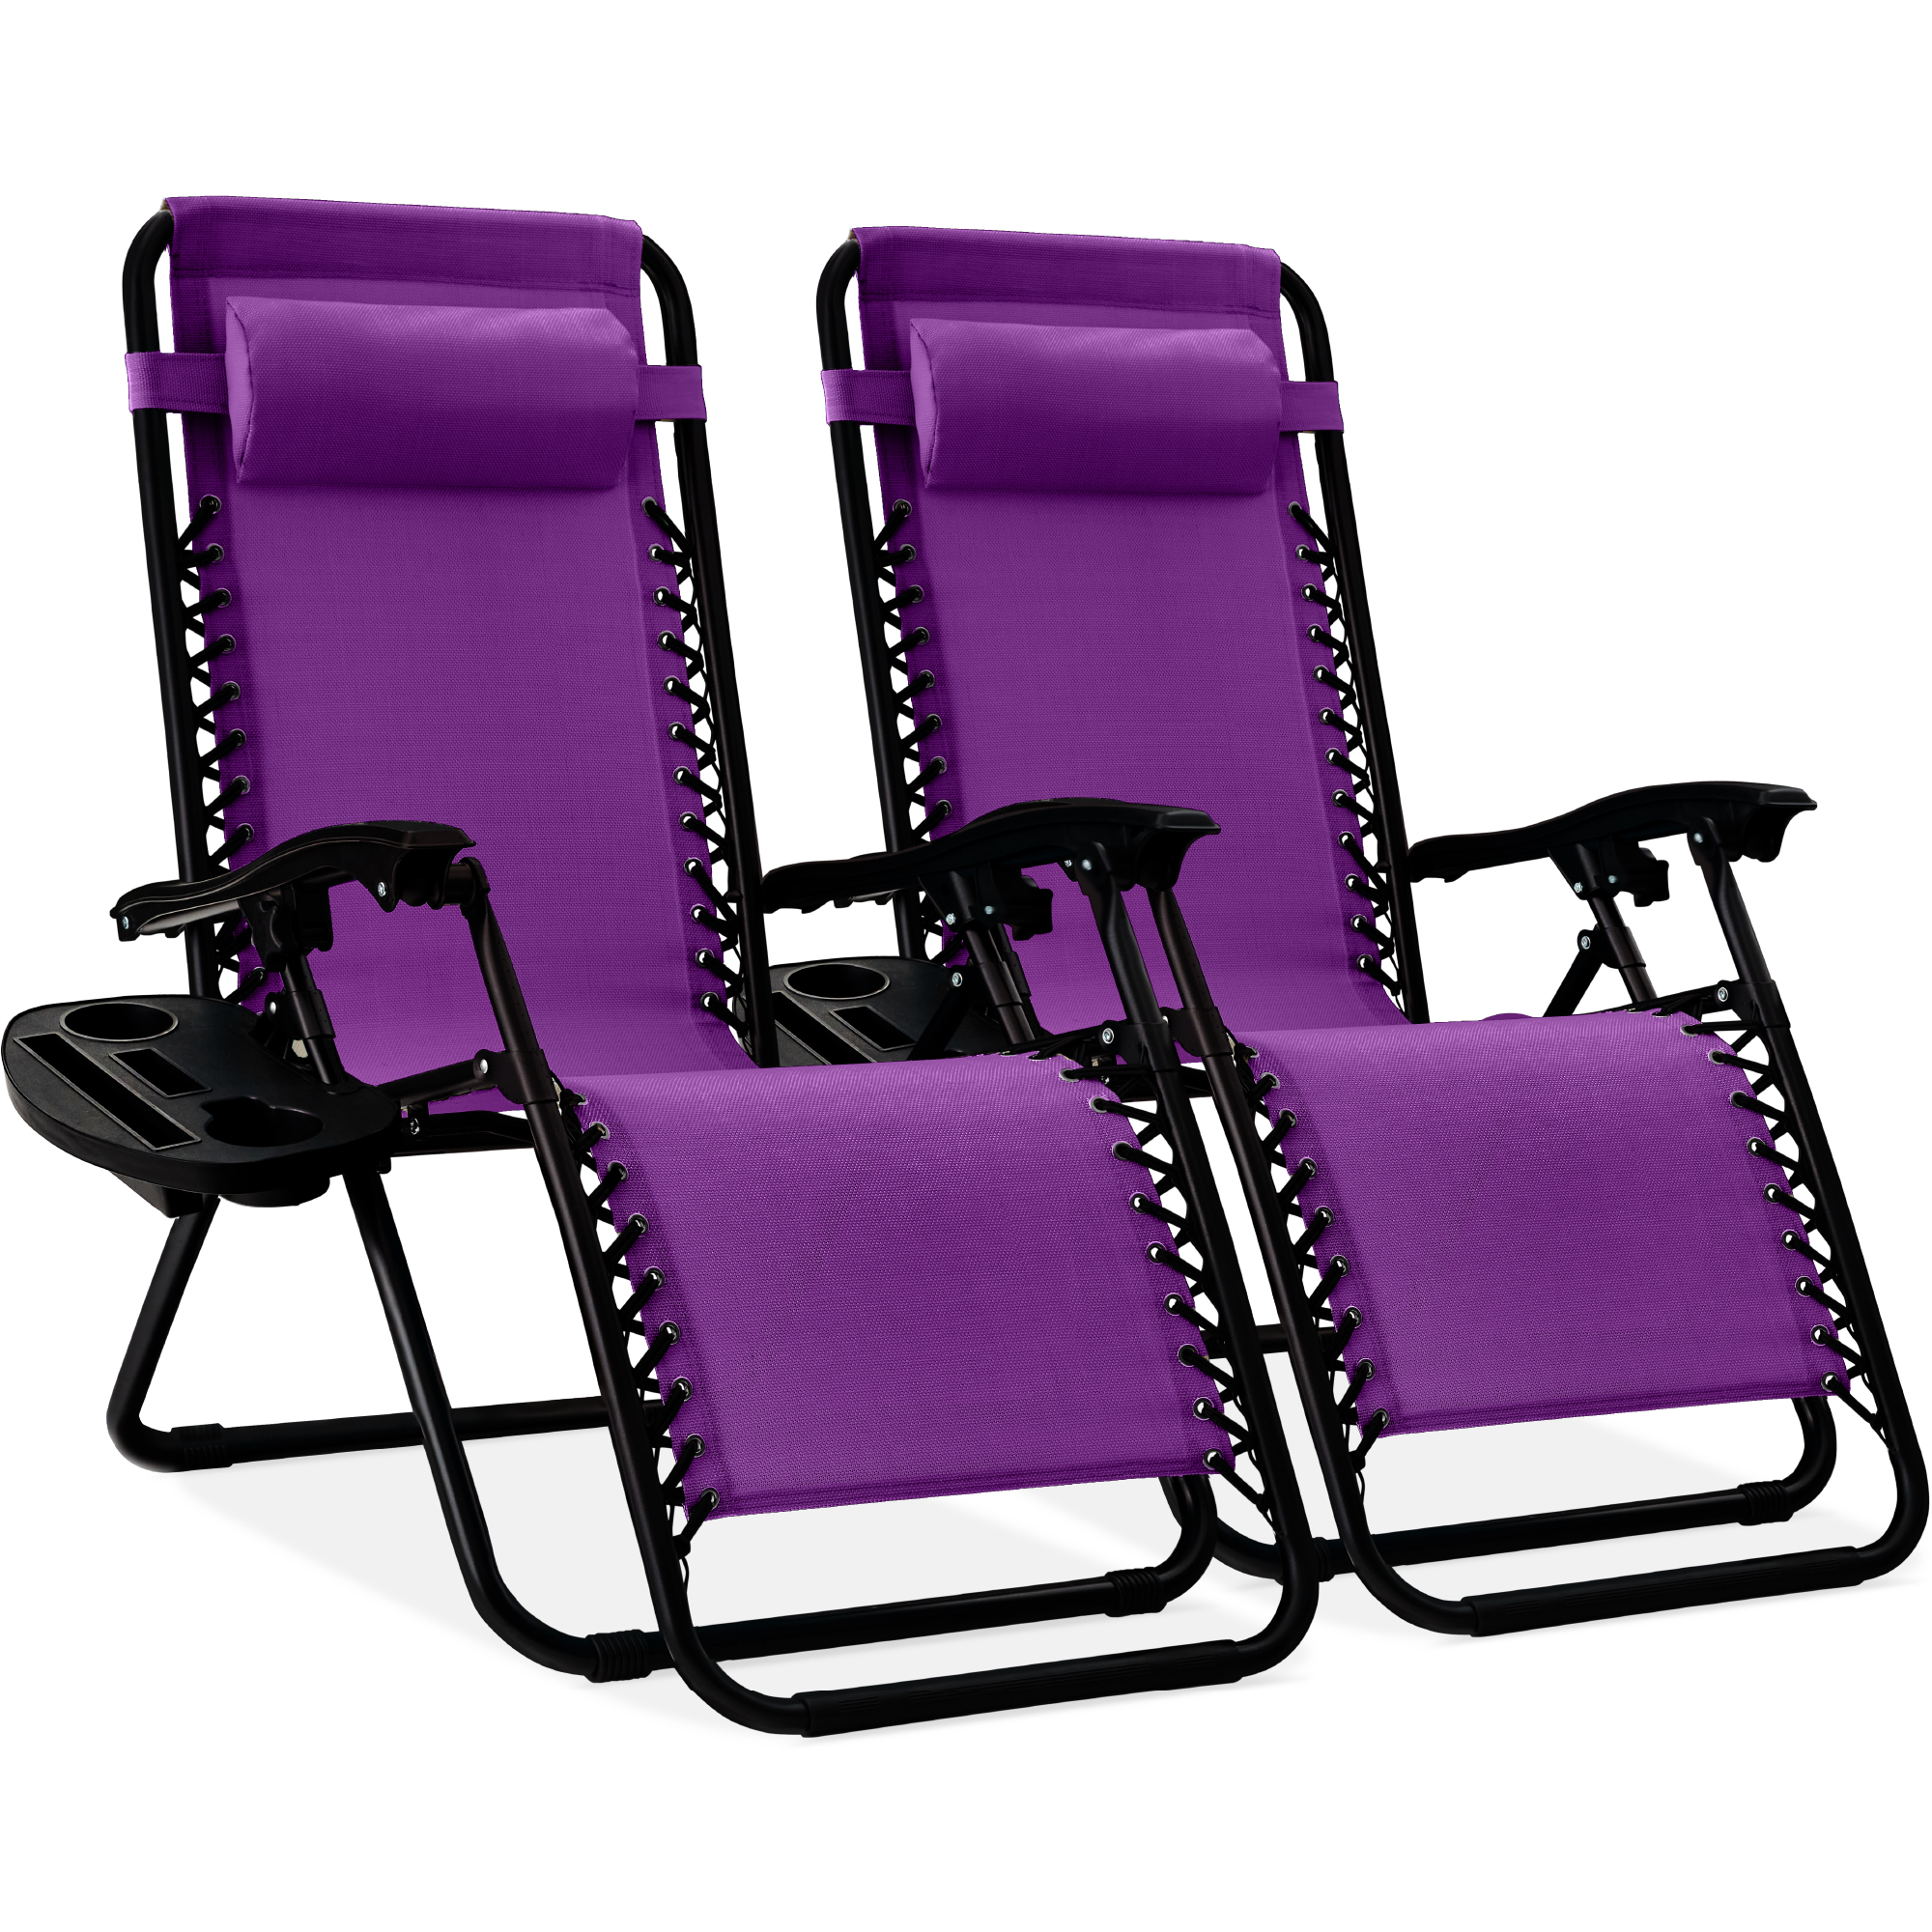 Best Choice Products Set of 2 Zero Gravity Lounge Chair Recliners for Patio, Pool w/ Cup Holder Tray - Amethyst Purple - image 1 of 8